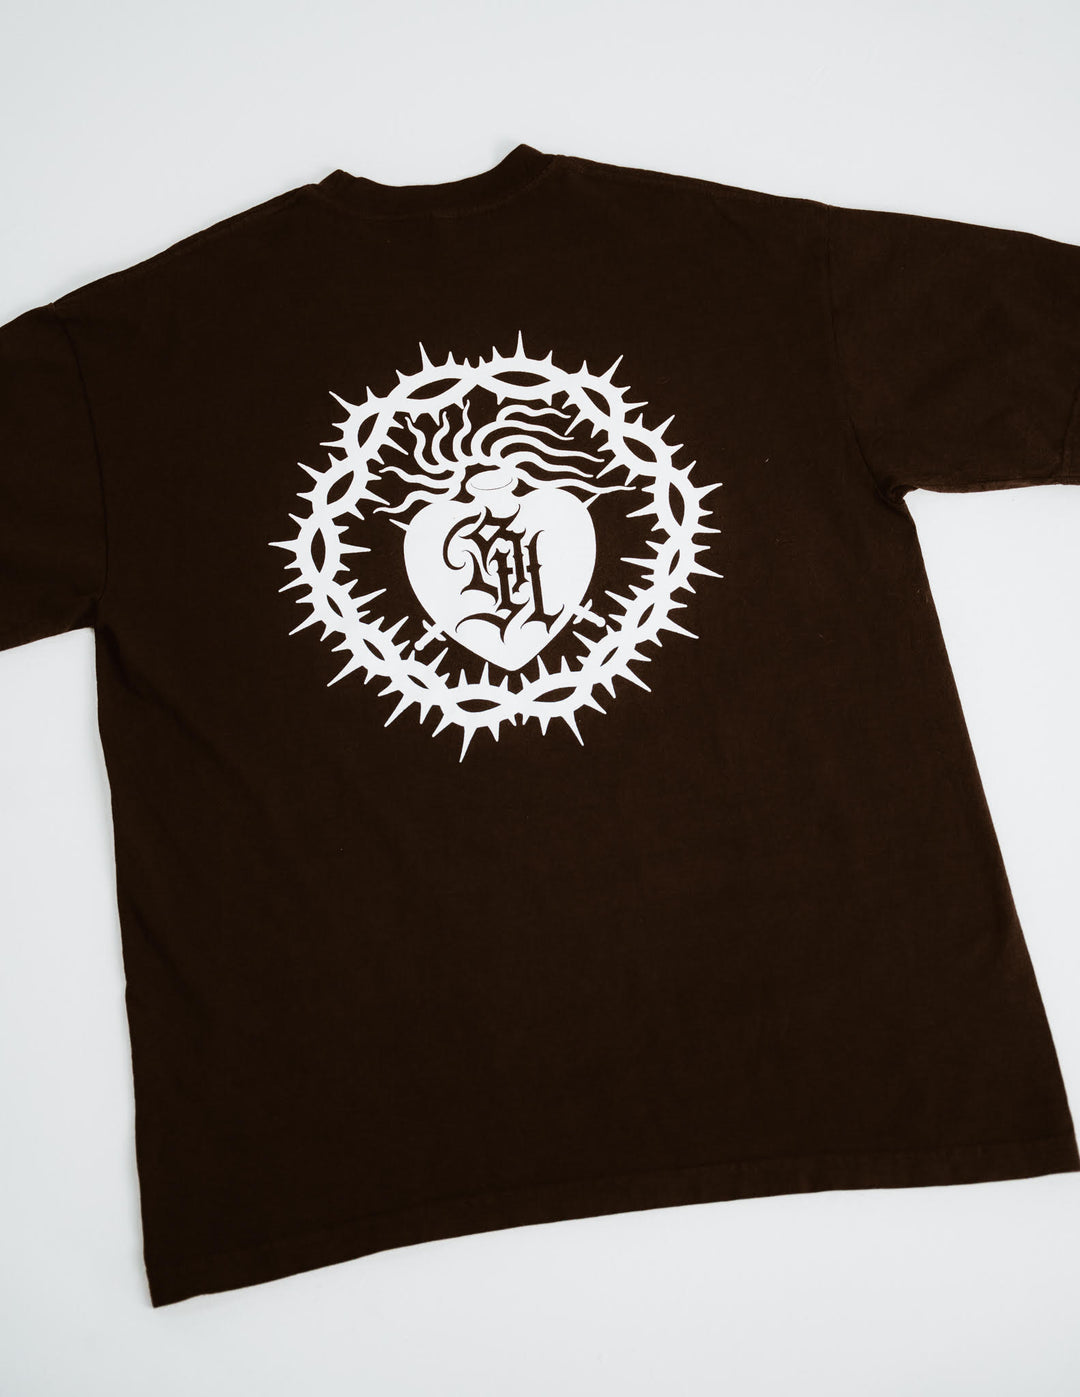 Buy Brown Monogram Tee with Authentic Tattoo Art